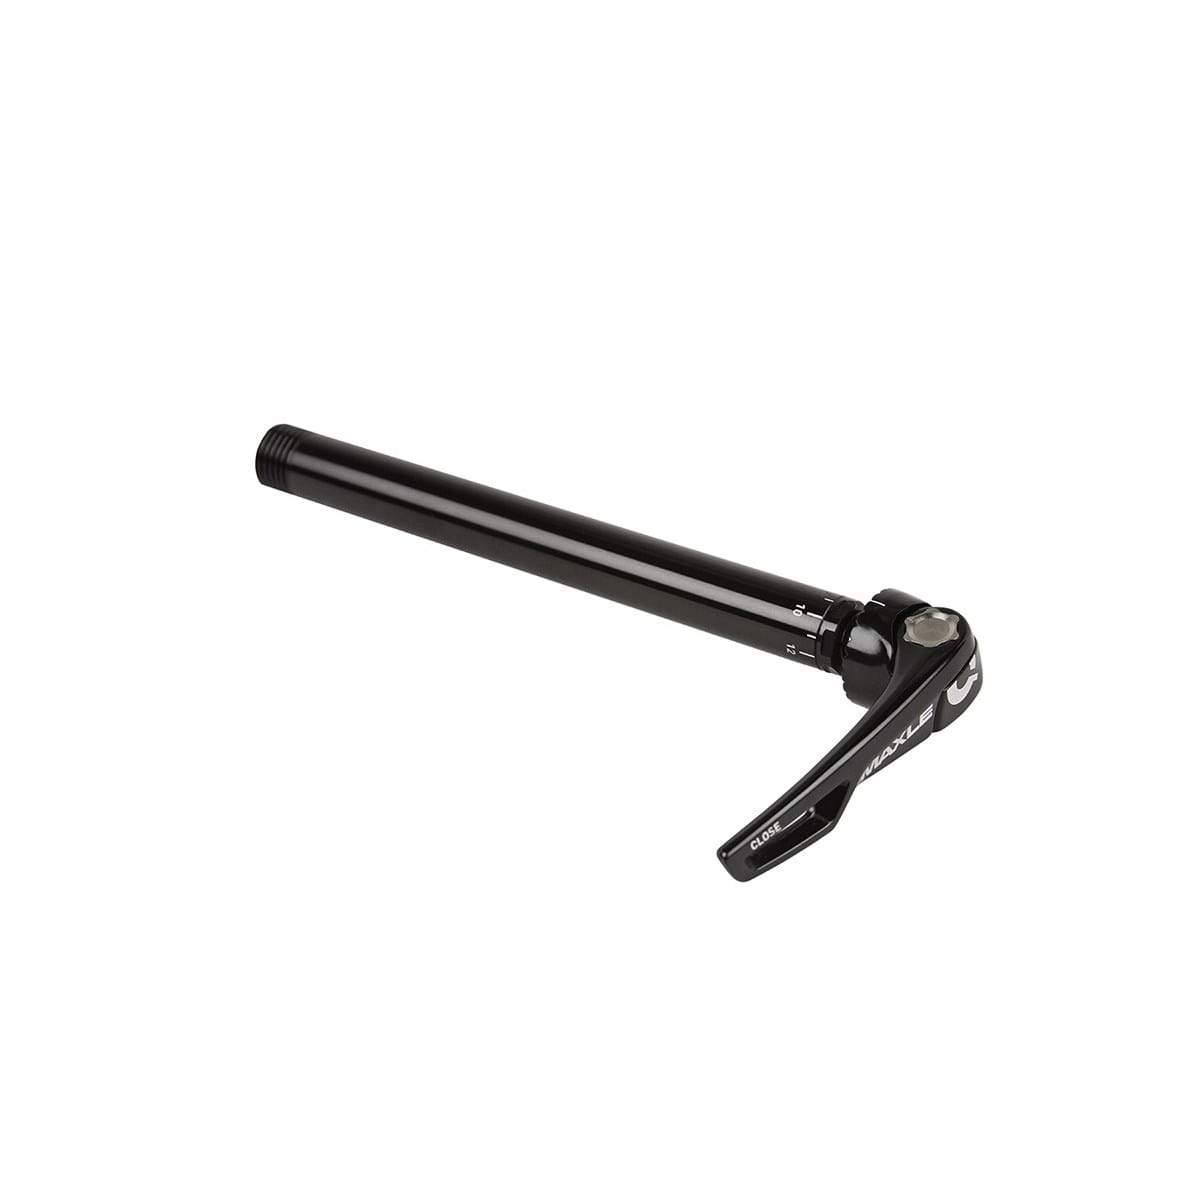 SRAM AXLE MAXLE ULTIMATE FRONT, 15X100, LENGTH 125MM, THREAD LENGTH 9MM, THREAD PITCH M15X1.50 - ROAD